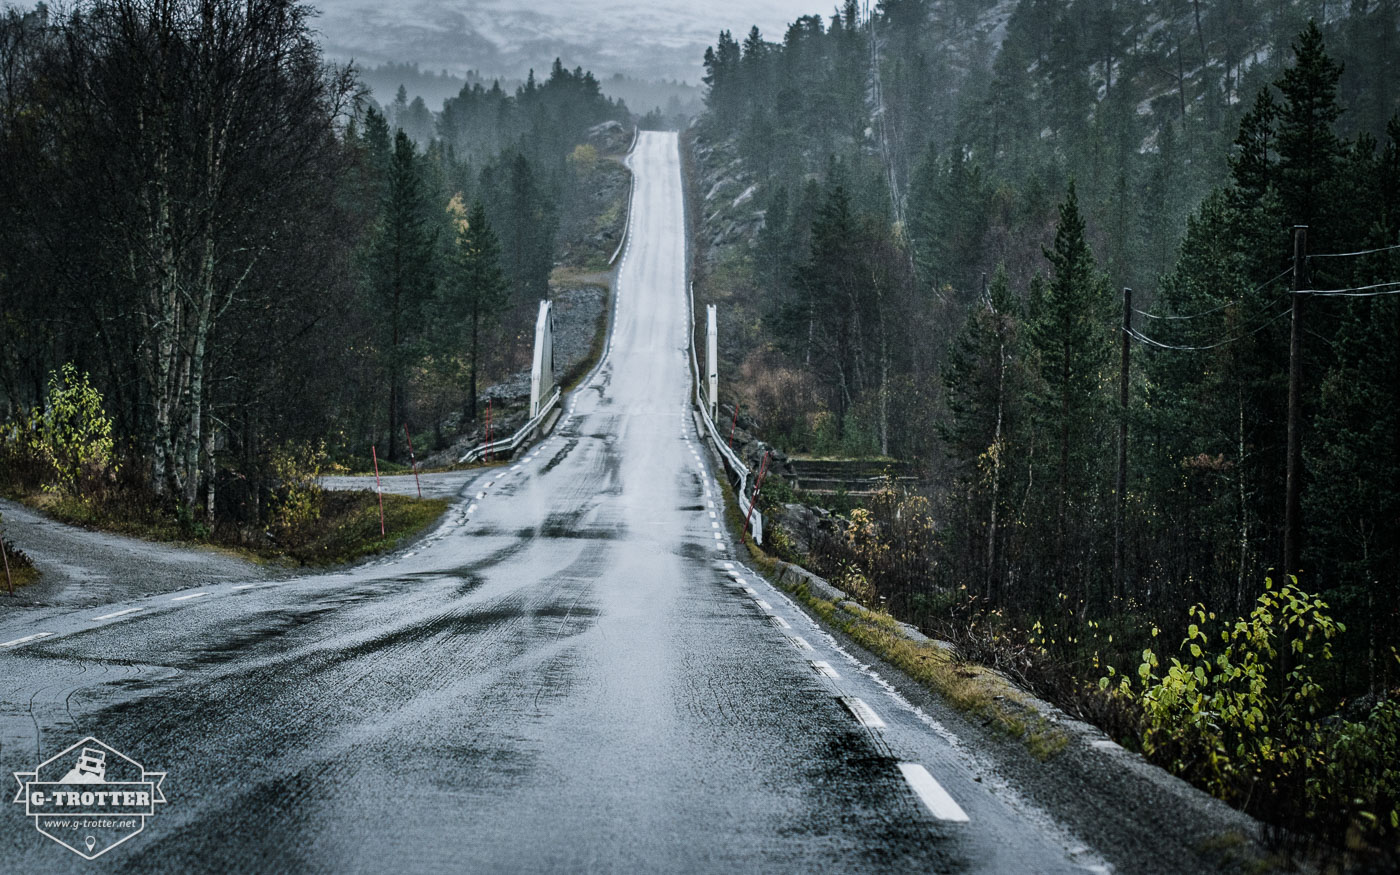 Picture 20 of the picture gallery “Roads of Norway”